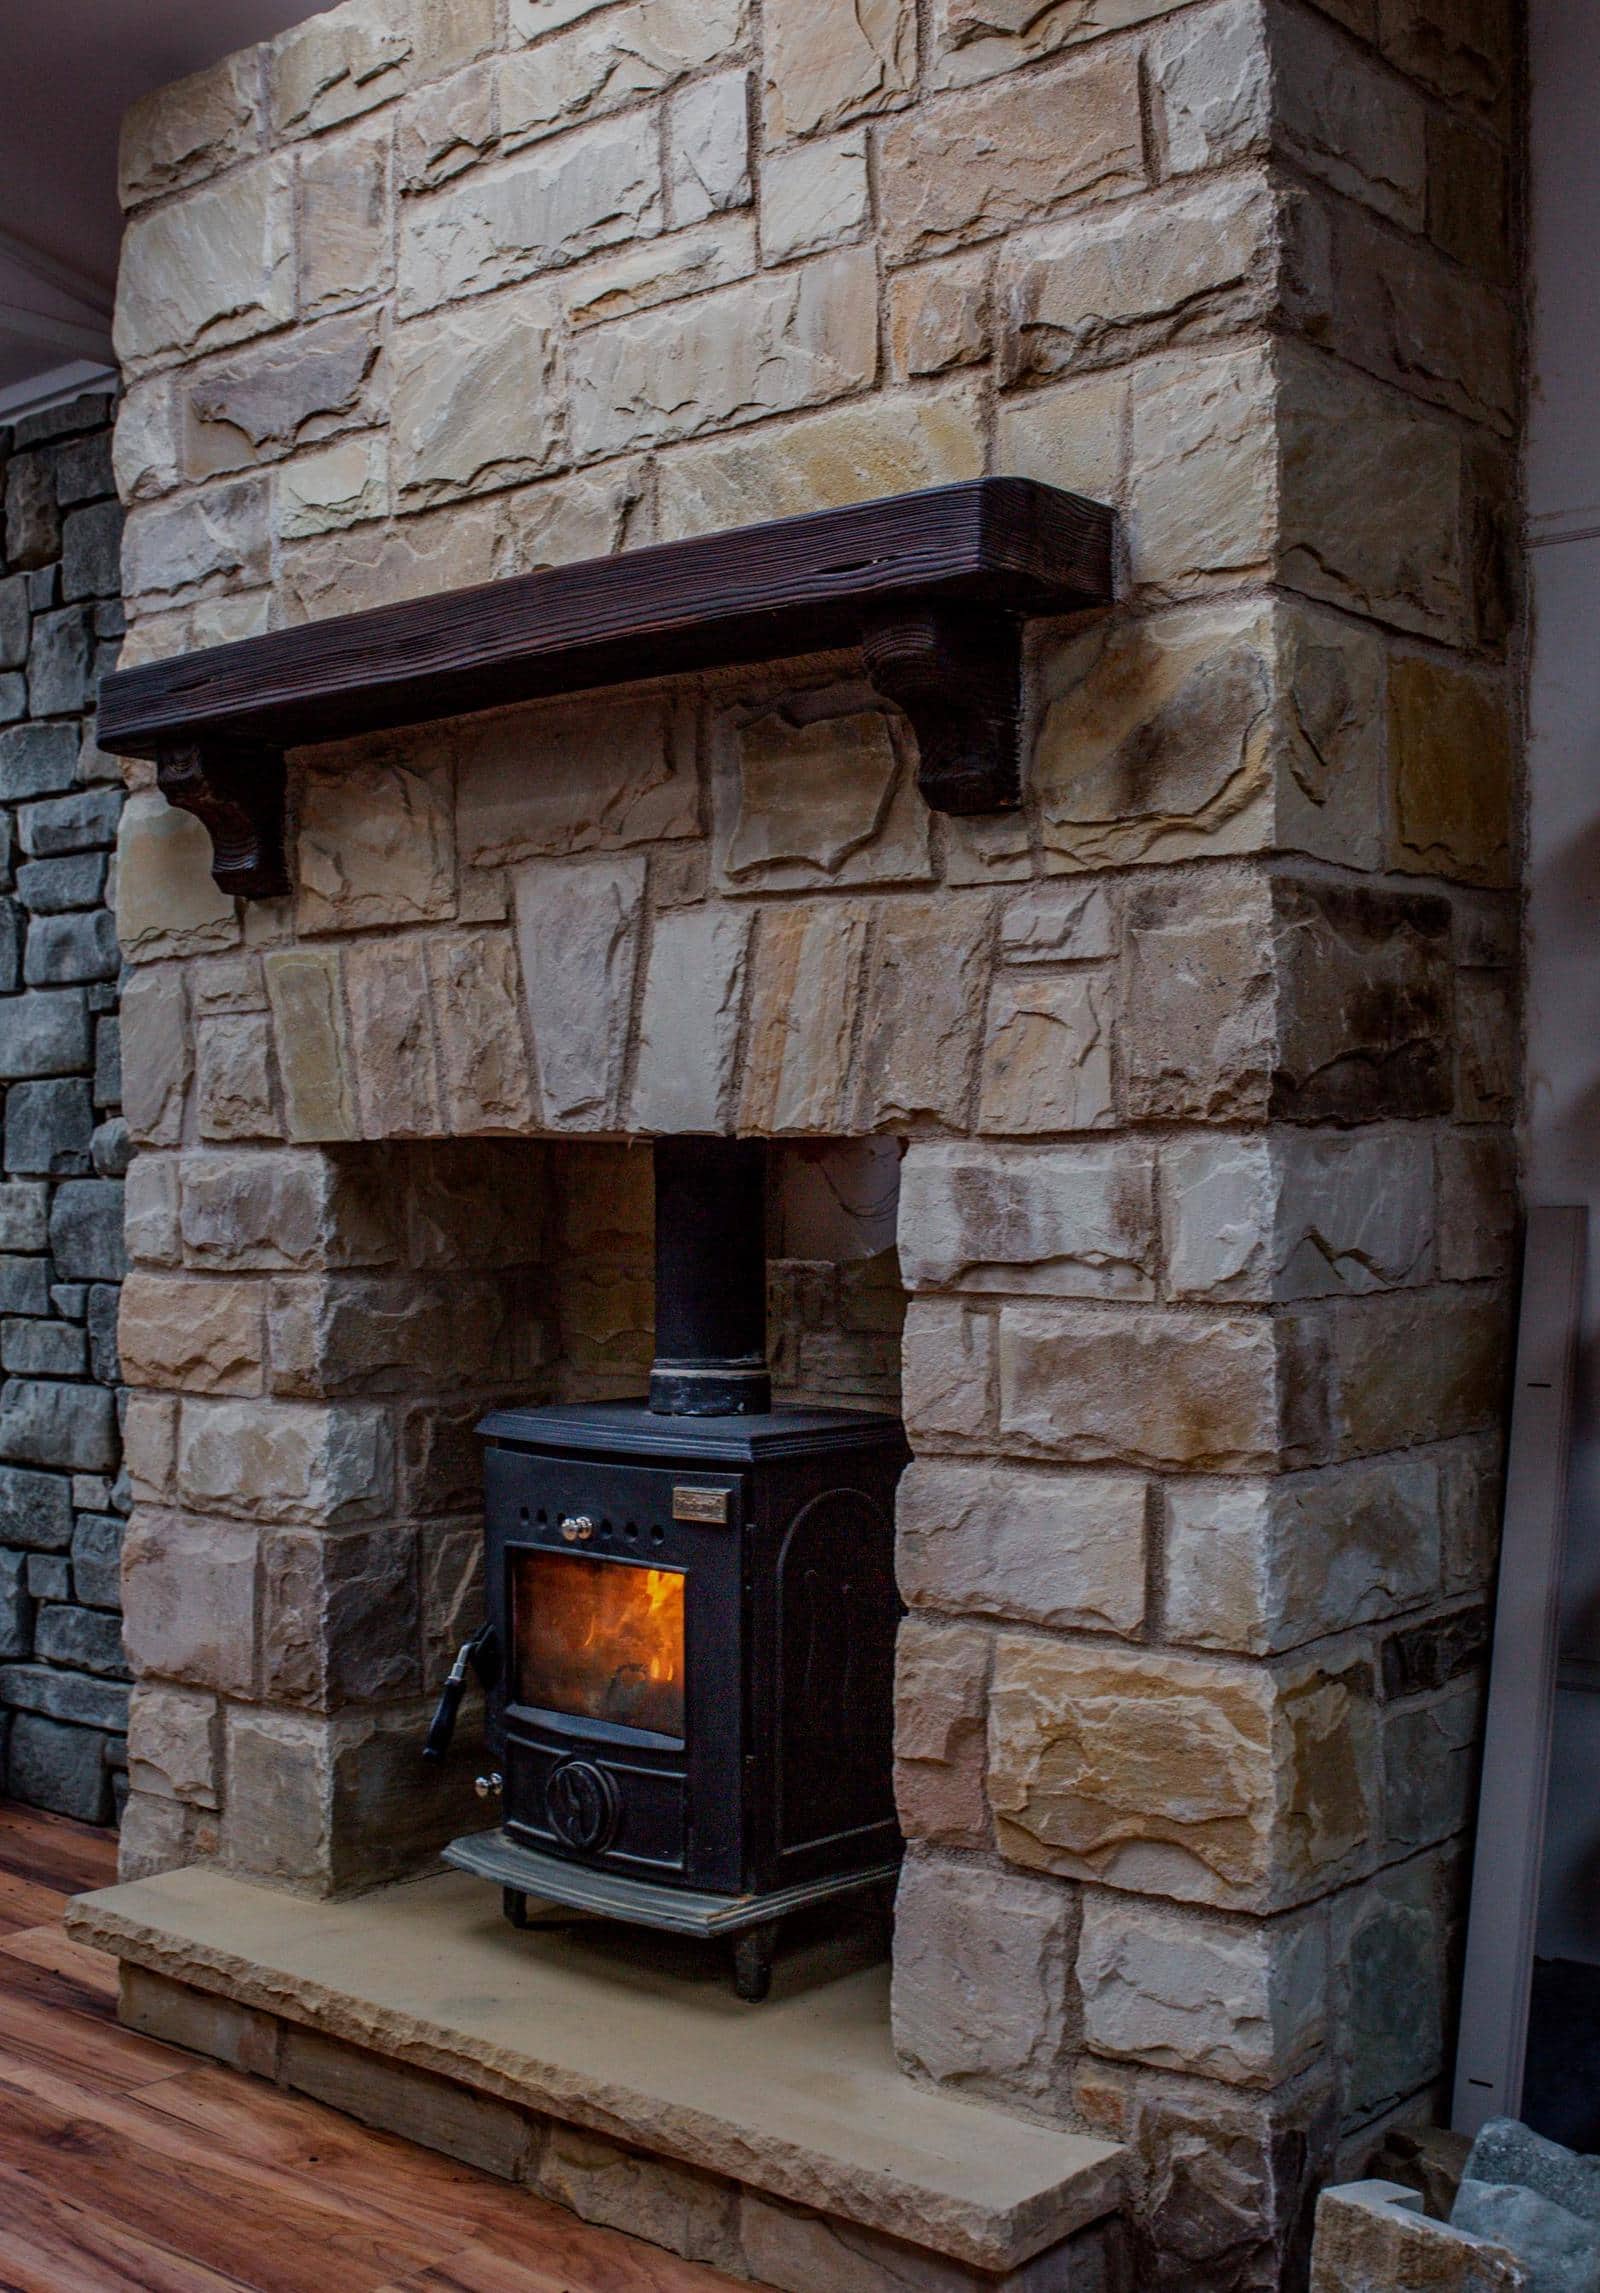 Sandstone Fireplace Hearths Lovely Fireplaces and Natural Stone Fireplaces